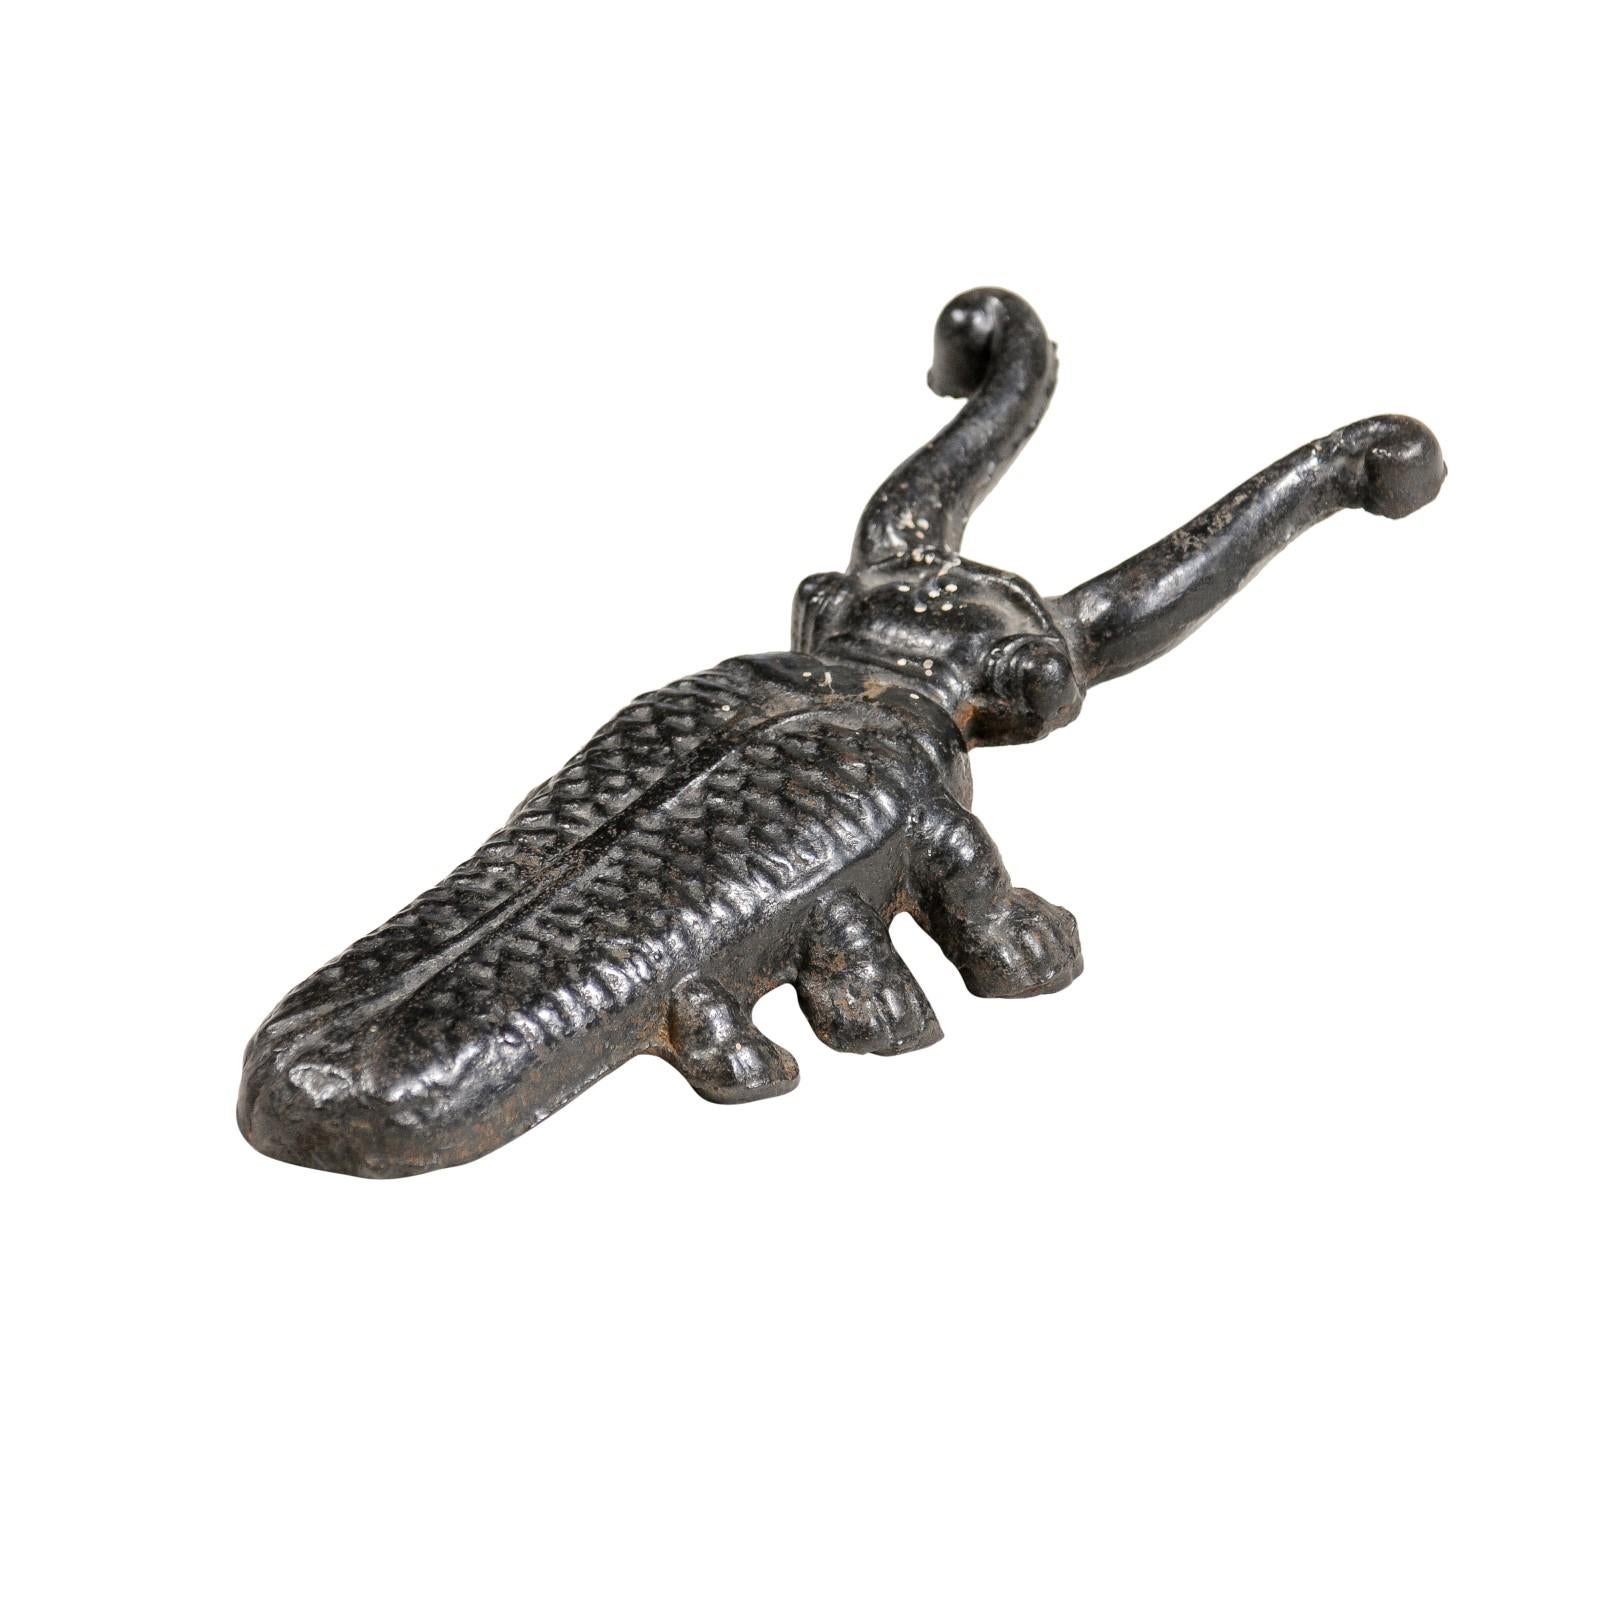 19th Century English Victorian Iron Bootjack Depicting a Cricket with Antennae 8